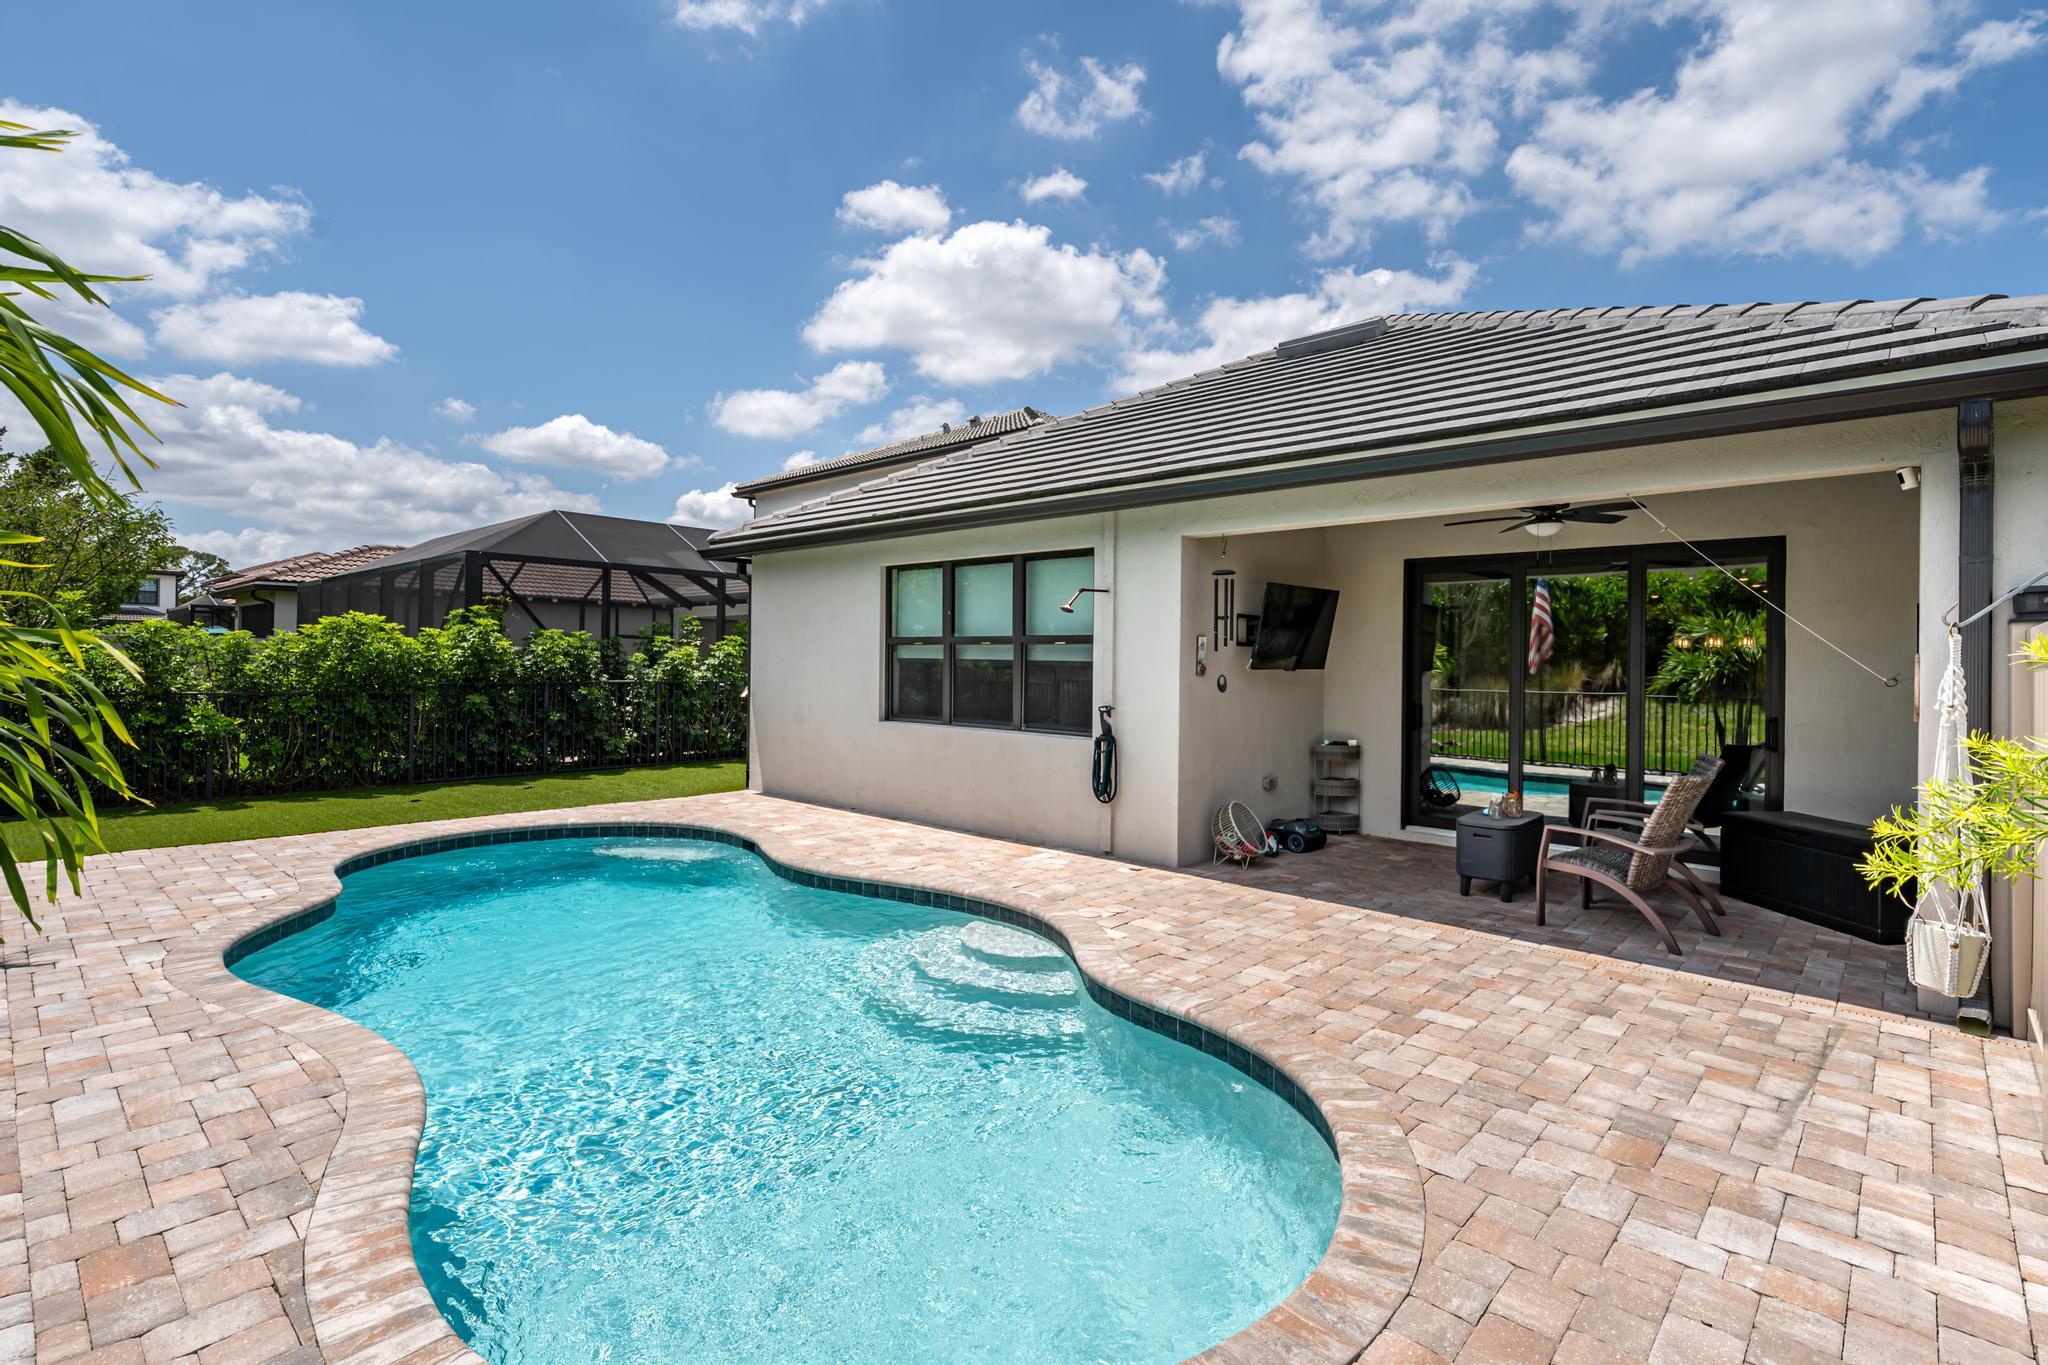 5014 Blistering Way, Lake Worth, Palm Beach County, Florida - 4 Bedrooms  
2 Bathrooms - 